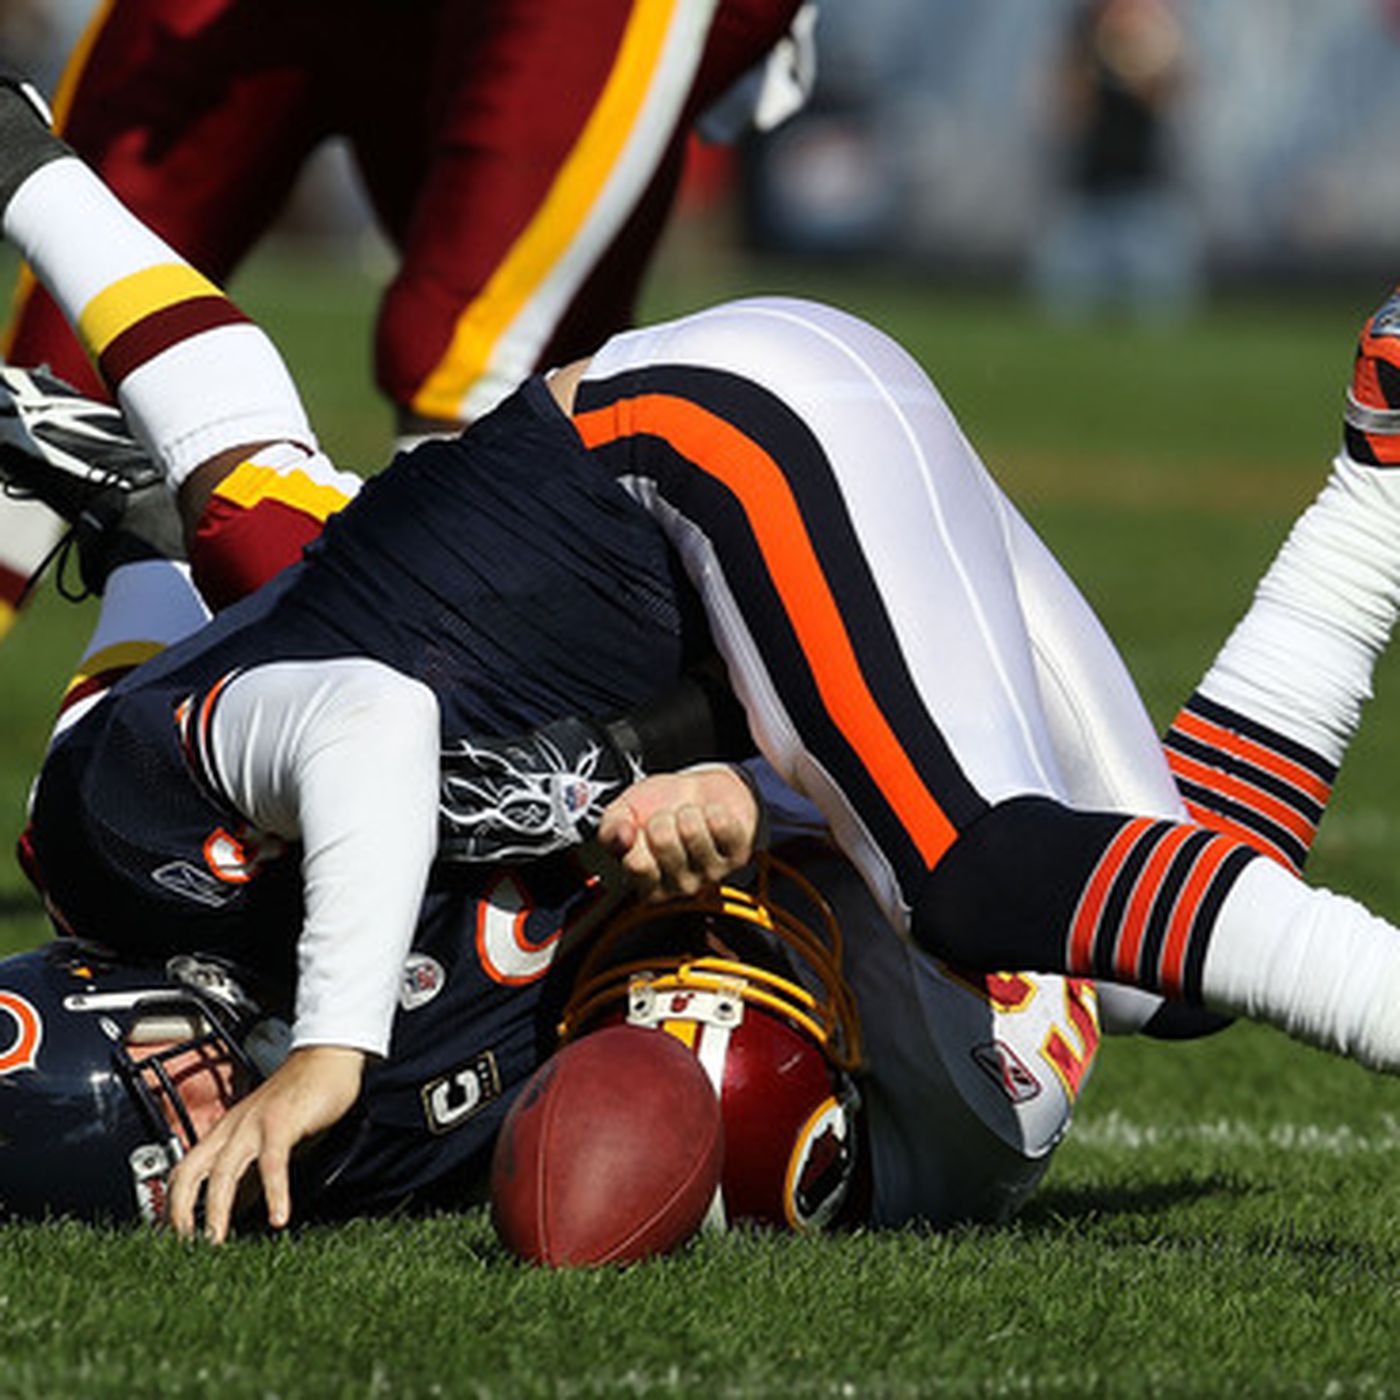 Bears Vs. Redskins Final: 17-14 Washington. Bears Lose Second Straight In  Soldier Field - SB Nation Chicago